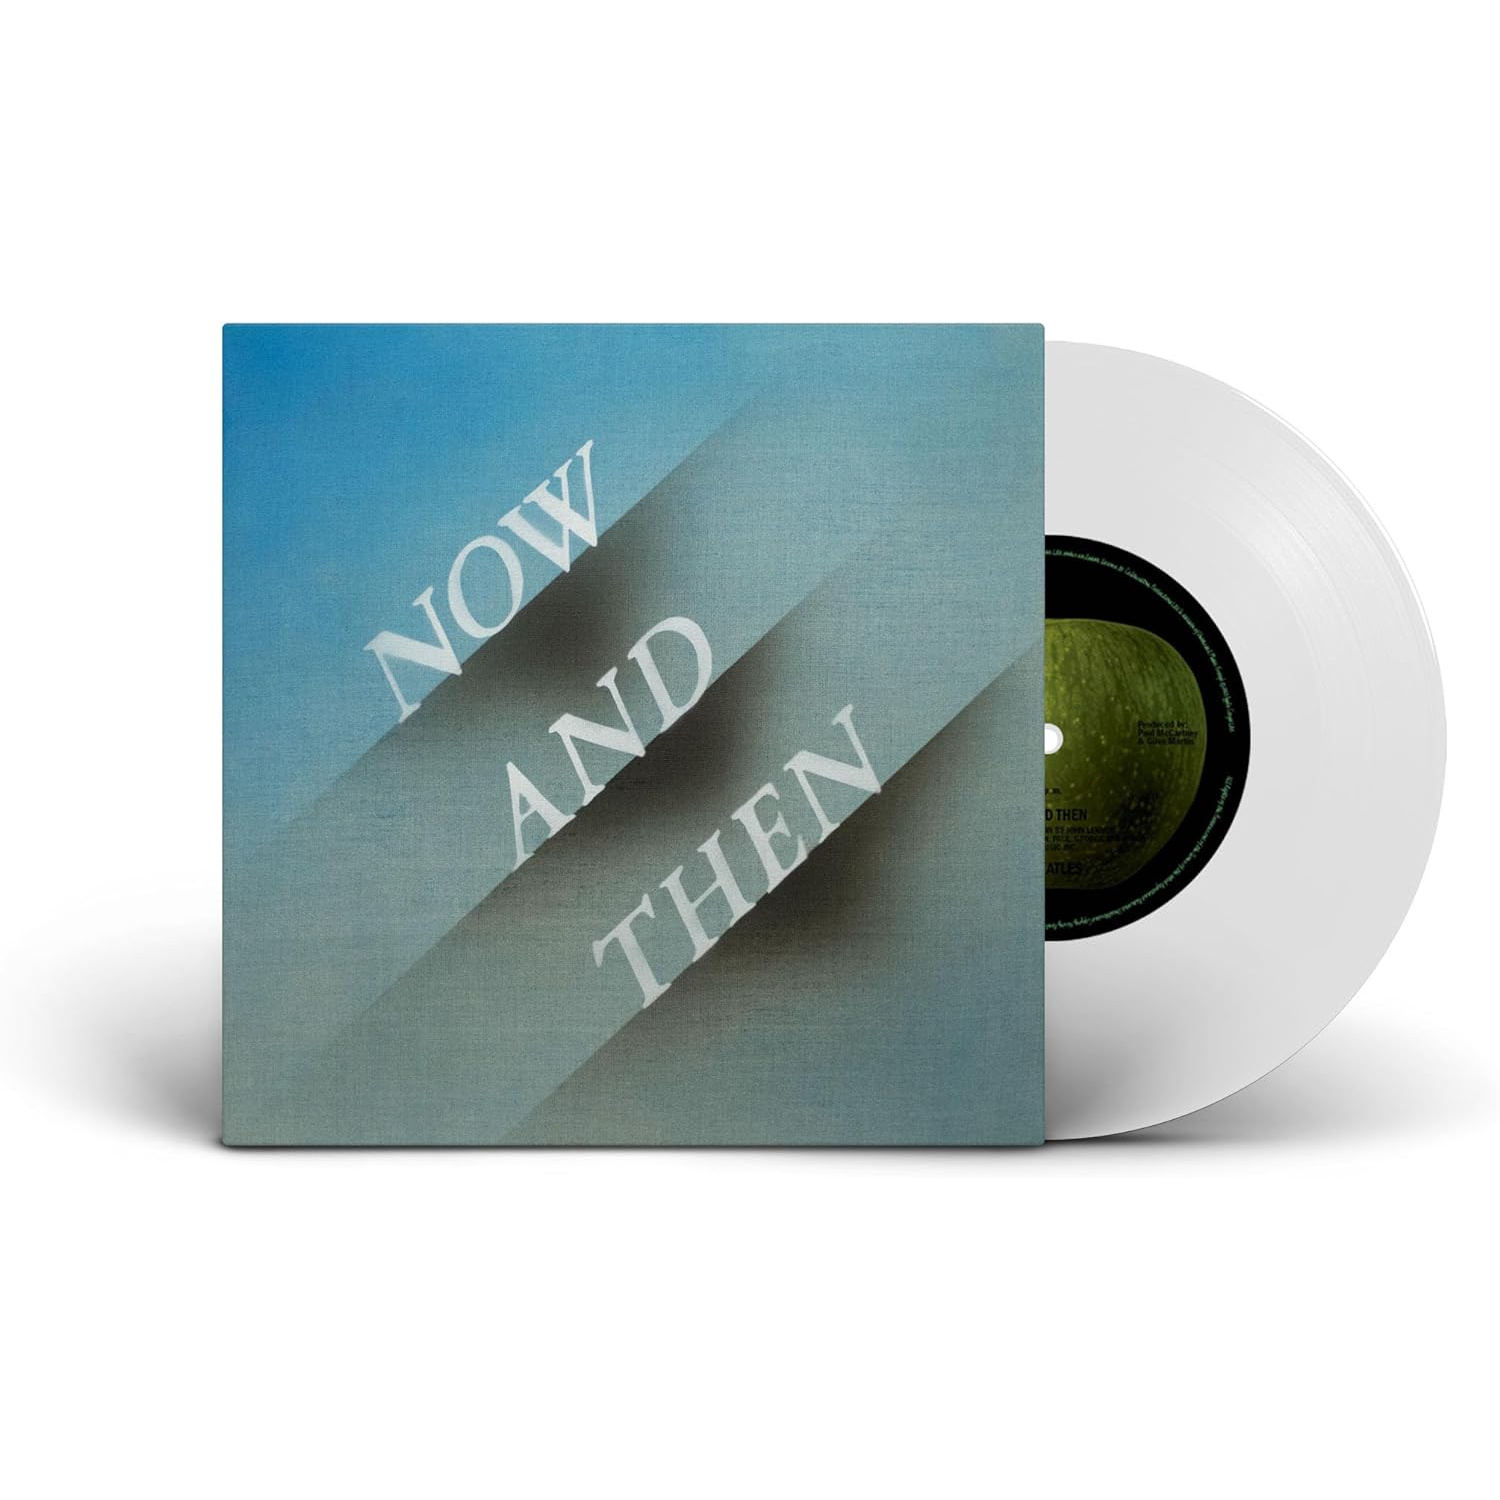 Now & Then 7” (Clear Version)